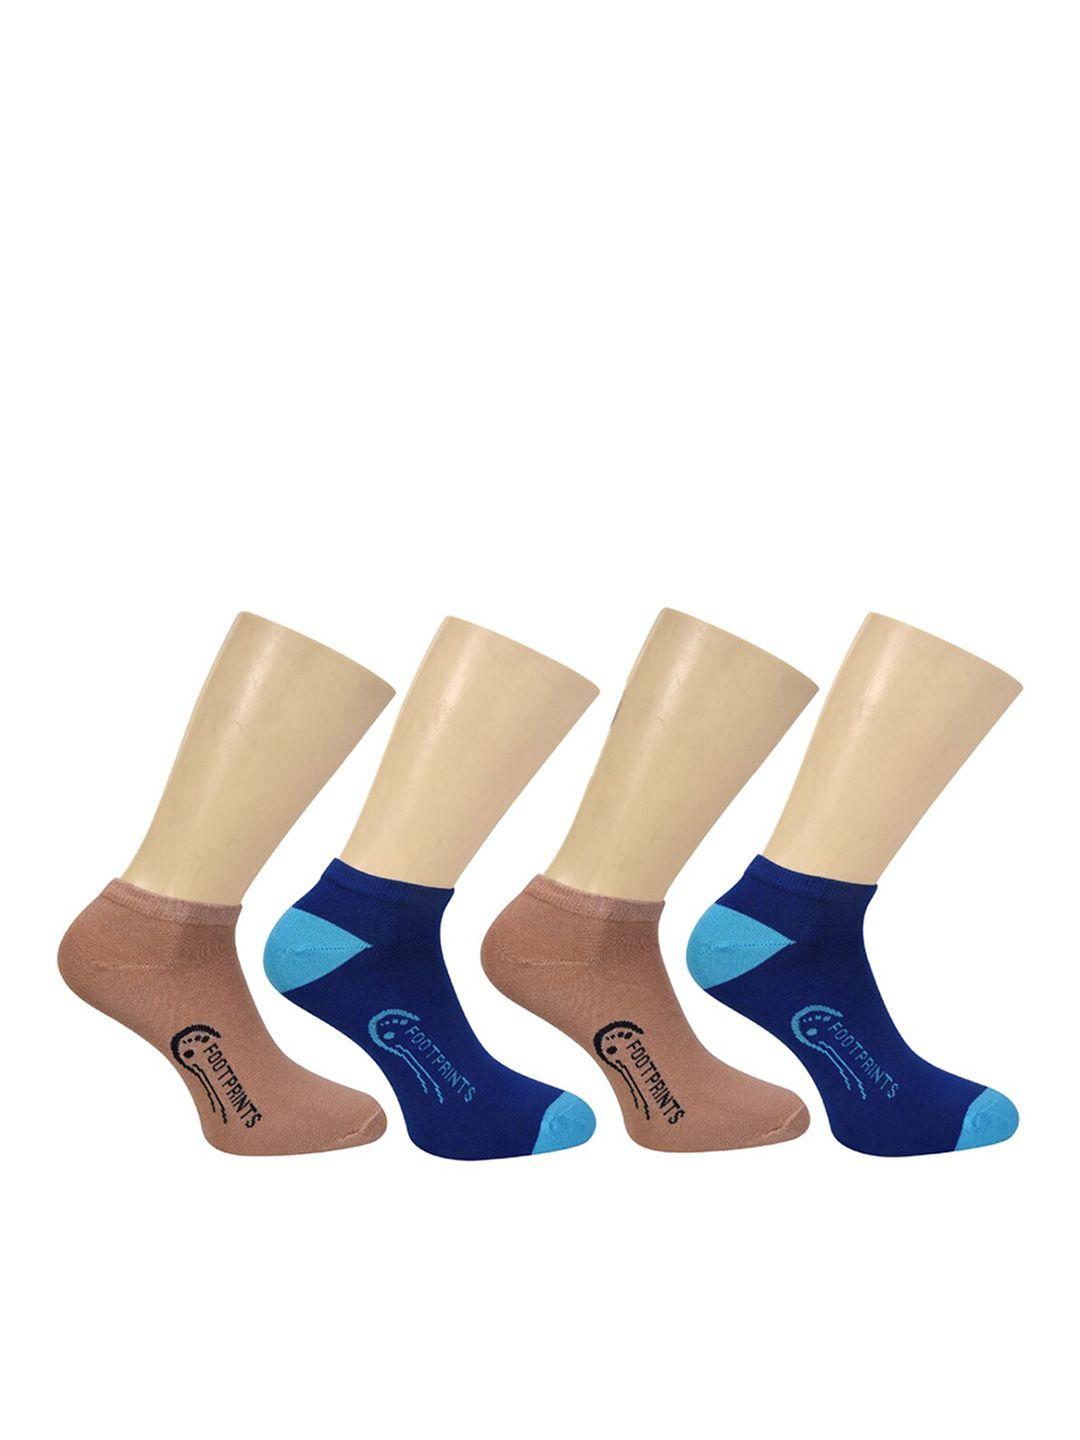 footprints pack of 4 ankle length organic cotton & bamboo socks